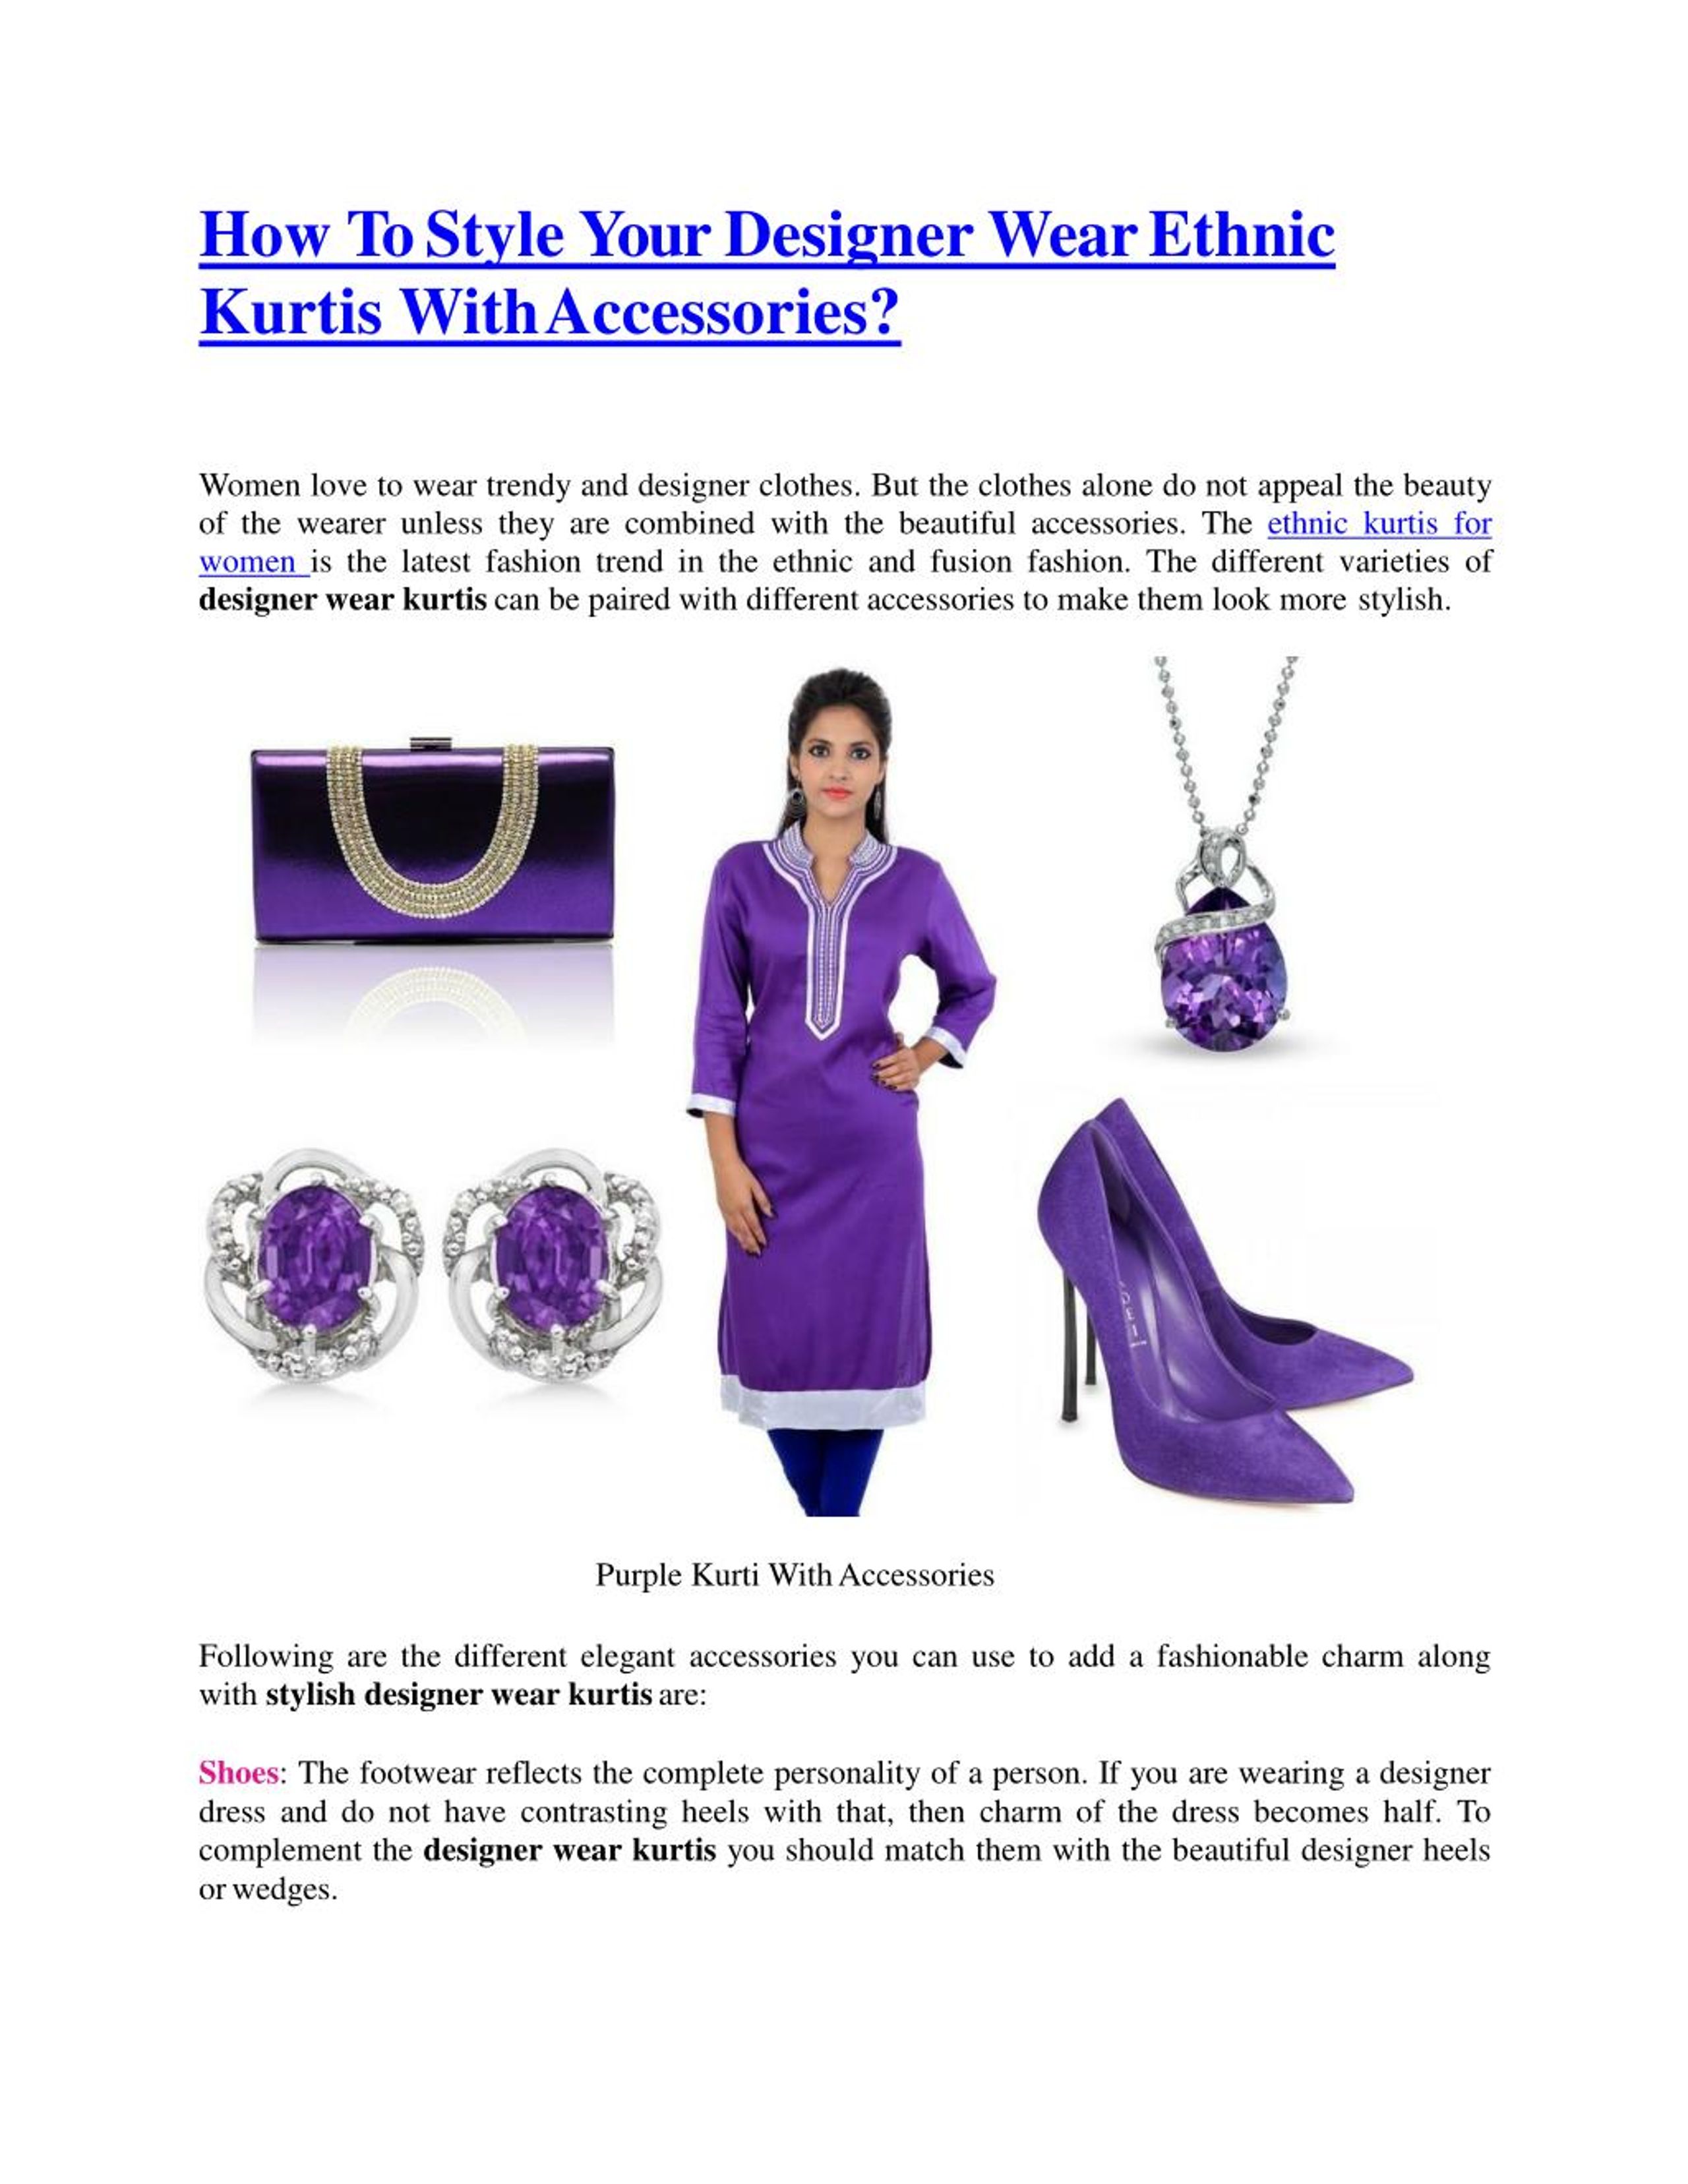 PPT - How To Style Your Designer Wear Ethnic Kurtis With Accessories?  PowerPoint Presentation - ID:7262327